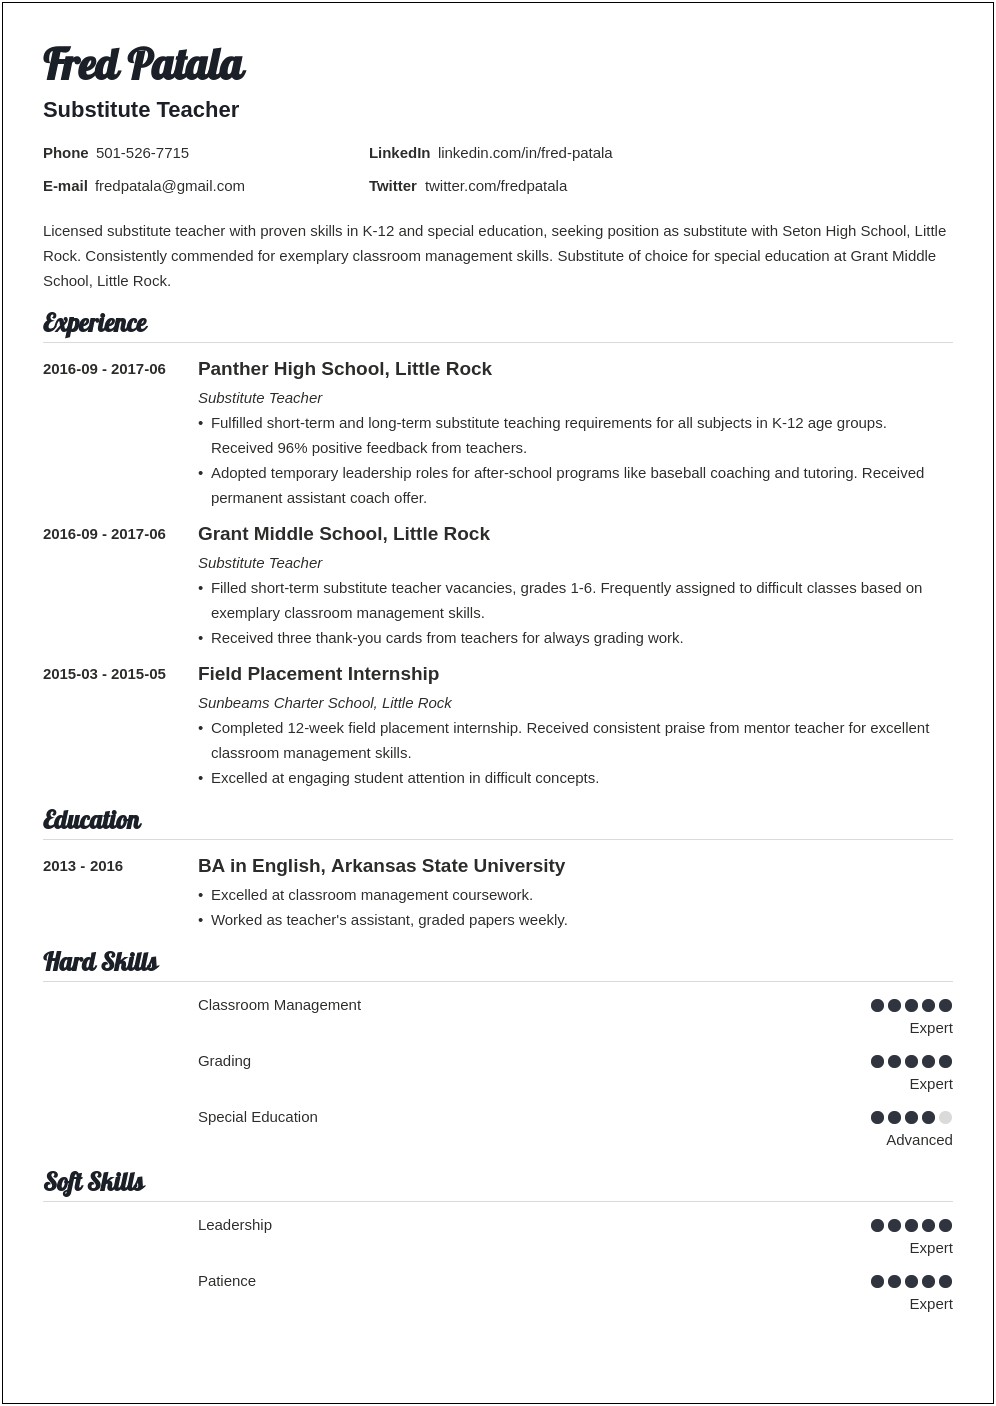 Resume Sample For First Time Substitute Teacher